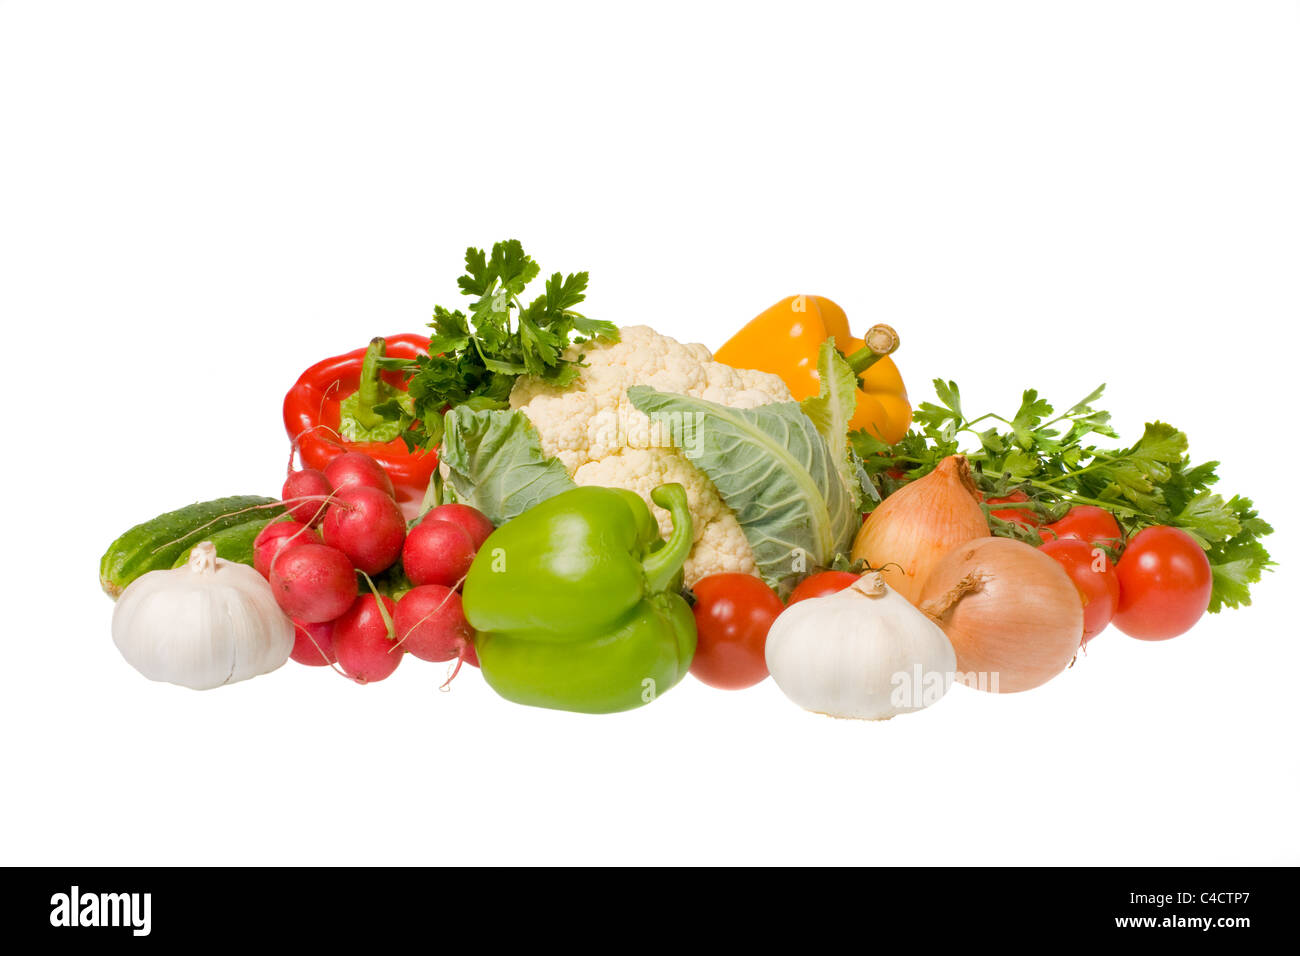 https://c8.alamy.com/comp/C4CTP7/group-of-vegetables-isolated-on-white-background-C4CTP7.jpg